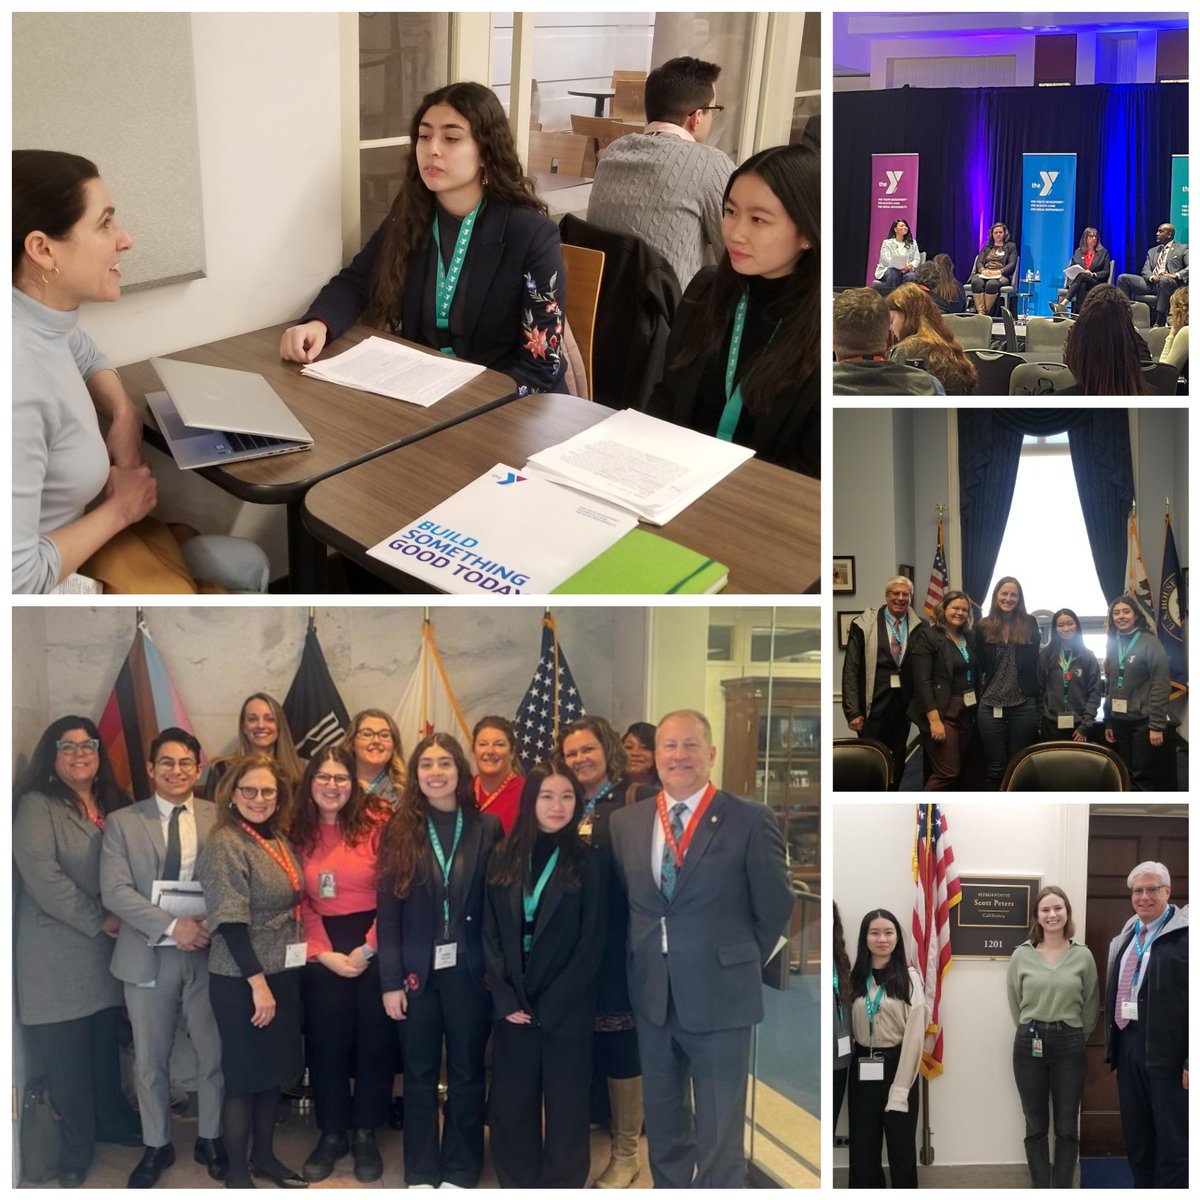 ✈📣 Reunited with nearly 400 @YMCAadvocacy advocates for Y National Advocacy Days. Sharing this work w/ @ymcayag teens is the best! 
✅#childcare & 21 century  ✅#chronicdiseaseprevention ✅#civiengagement 
TY to our #California members & teams for your continued support.